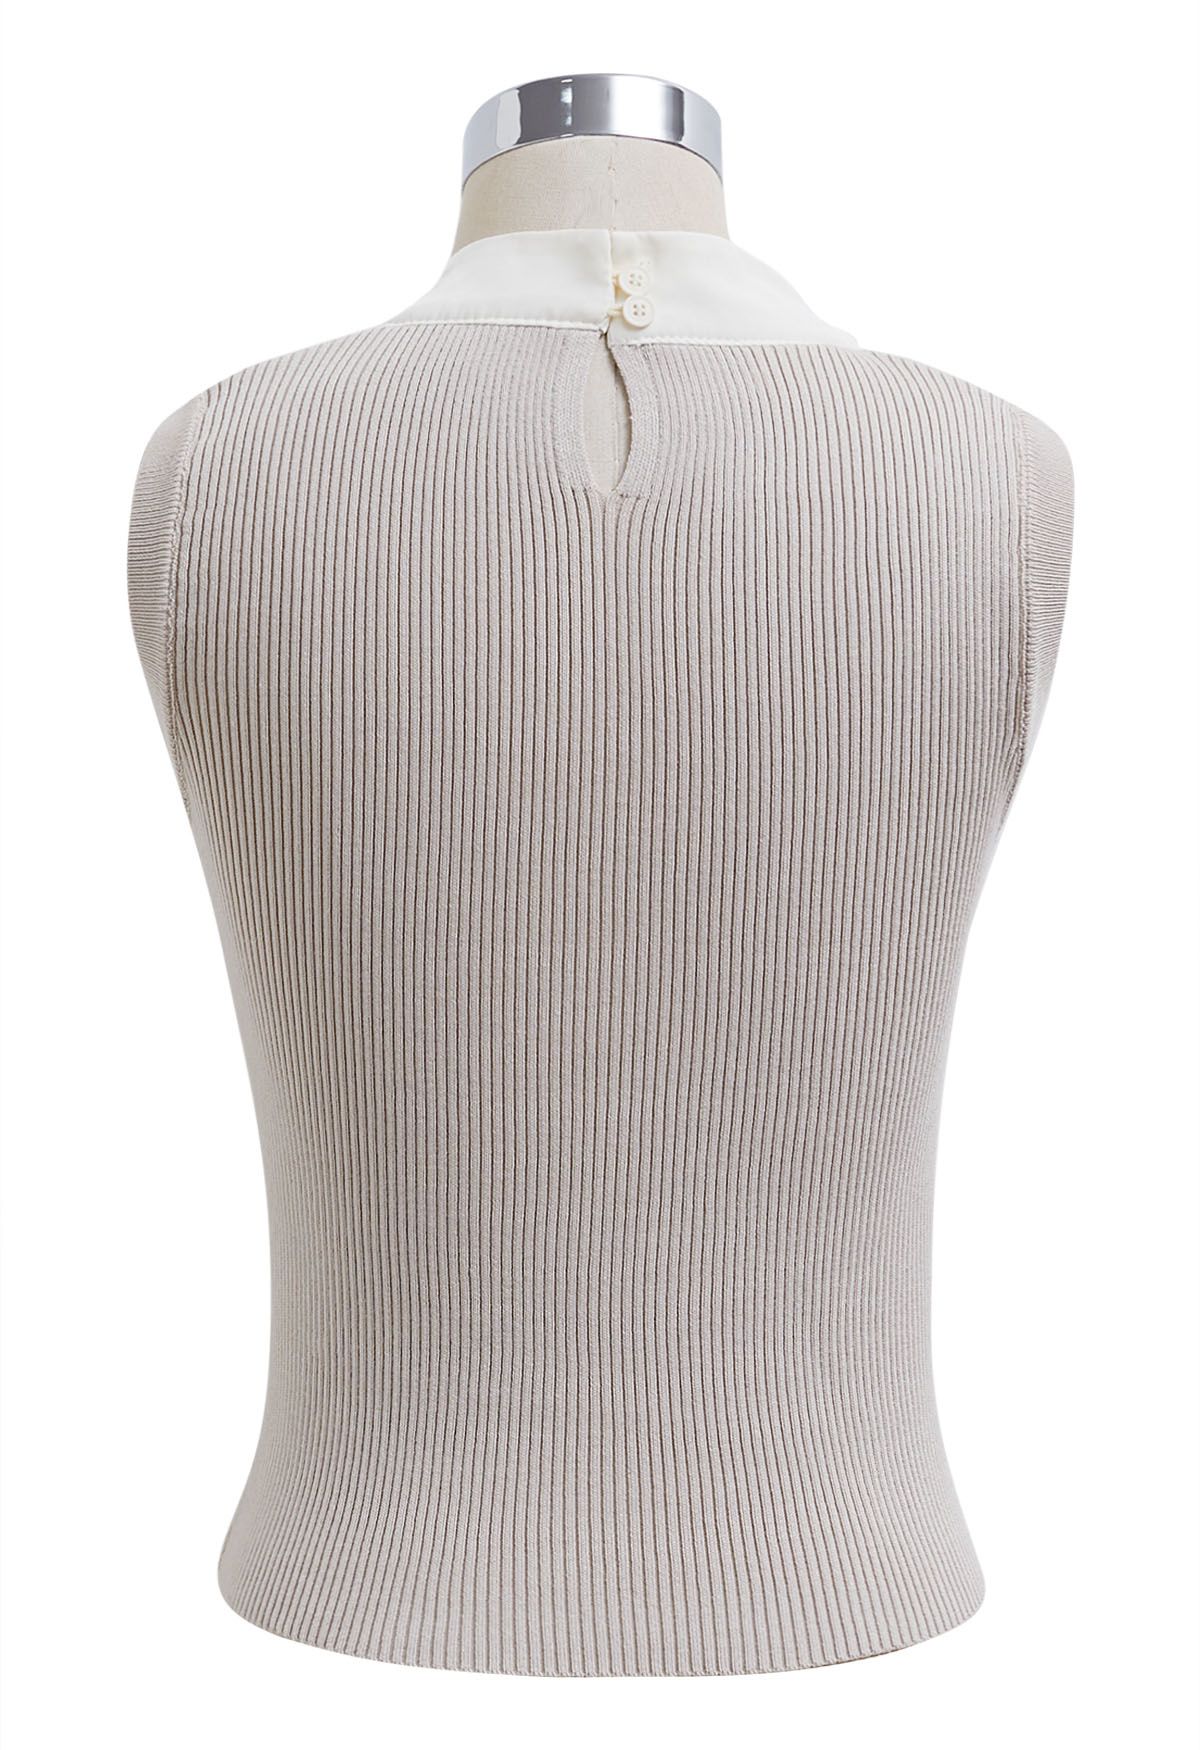 Bowknot Decor Sleeveless Knit Top in Oatmeal